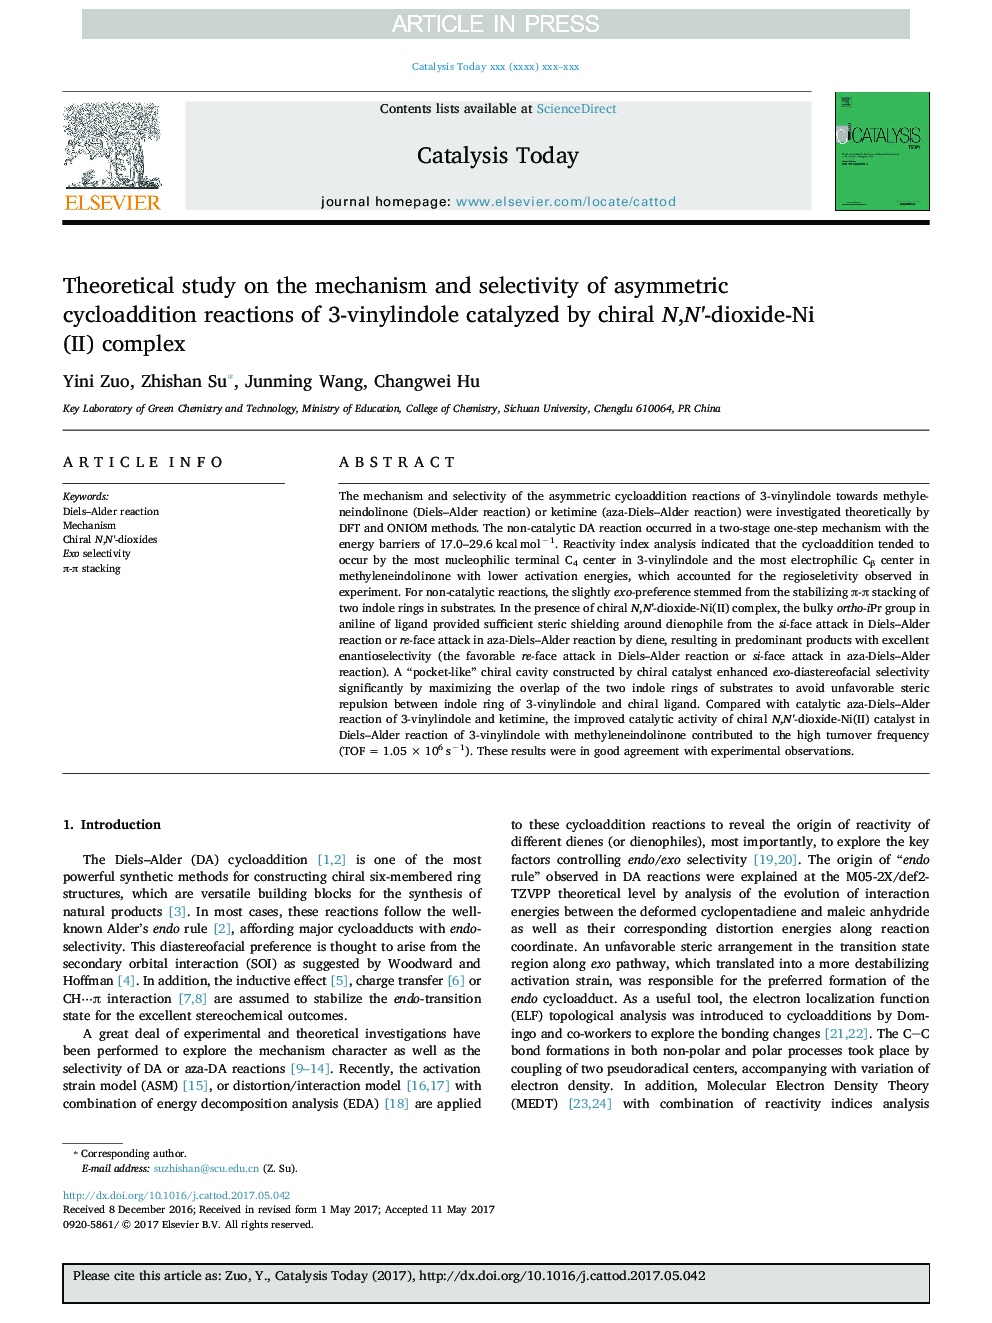 Theoretical study on the mechanism and selectivity of asymmetric cycloaddition reactions of 3-vinylindole catalyzed by chiral N,N'-dioxide-Ni(II) complex